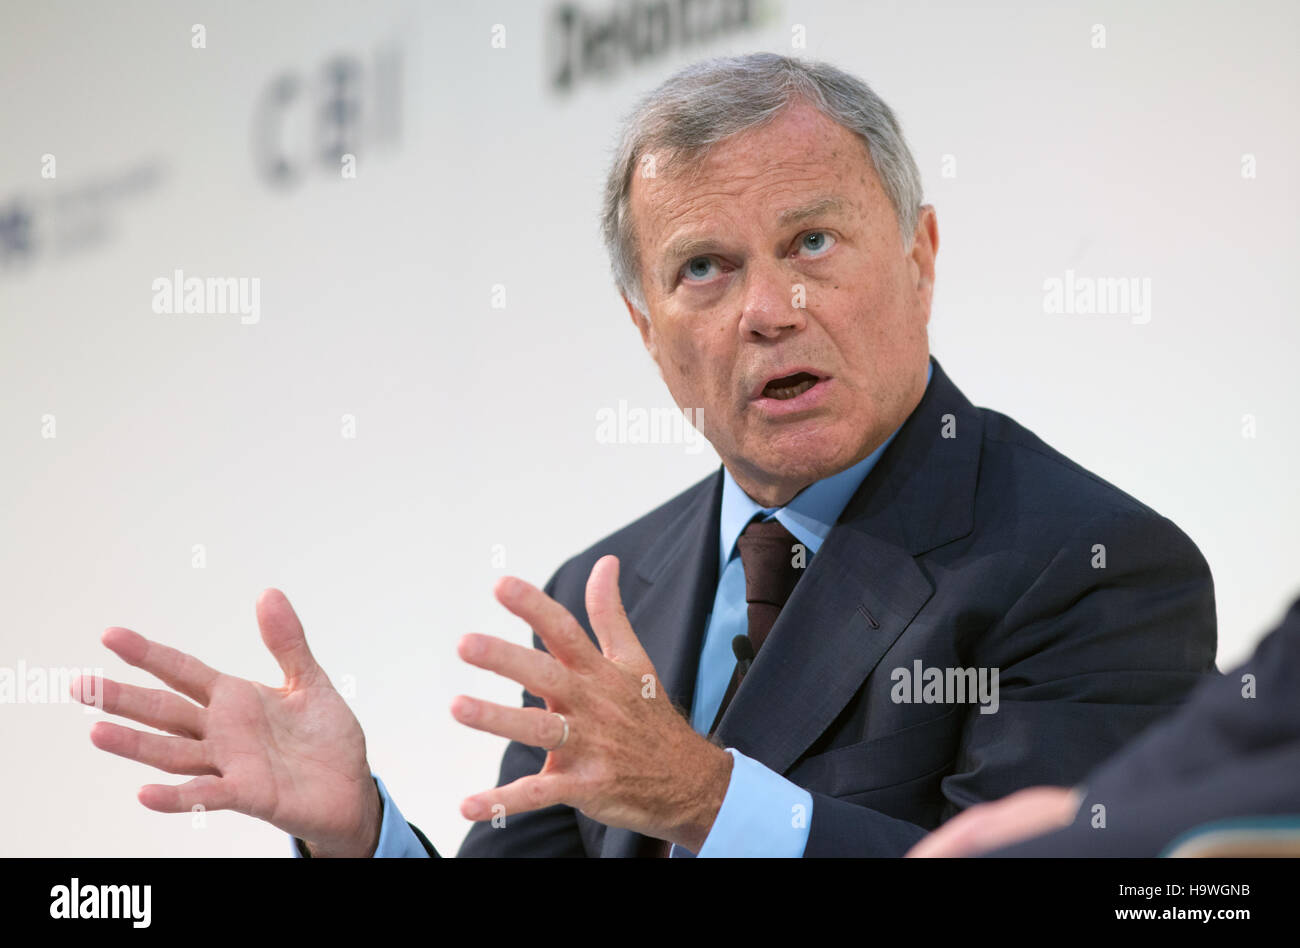 Martin Sorrell, chairman and CEO of WPP, the world's largest advertising company, speaks at the CBI conference in London 2016 Stock Photo